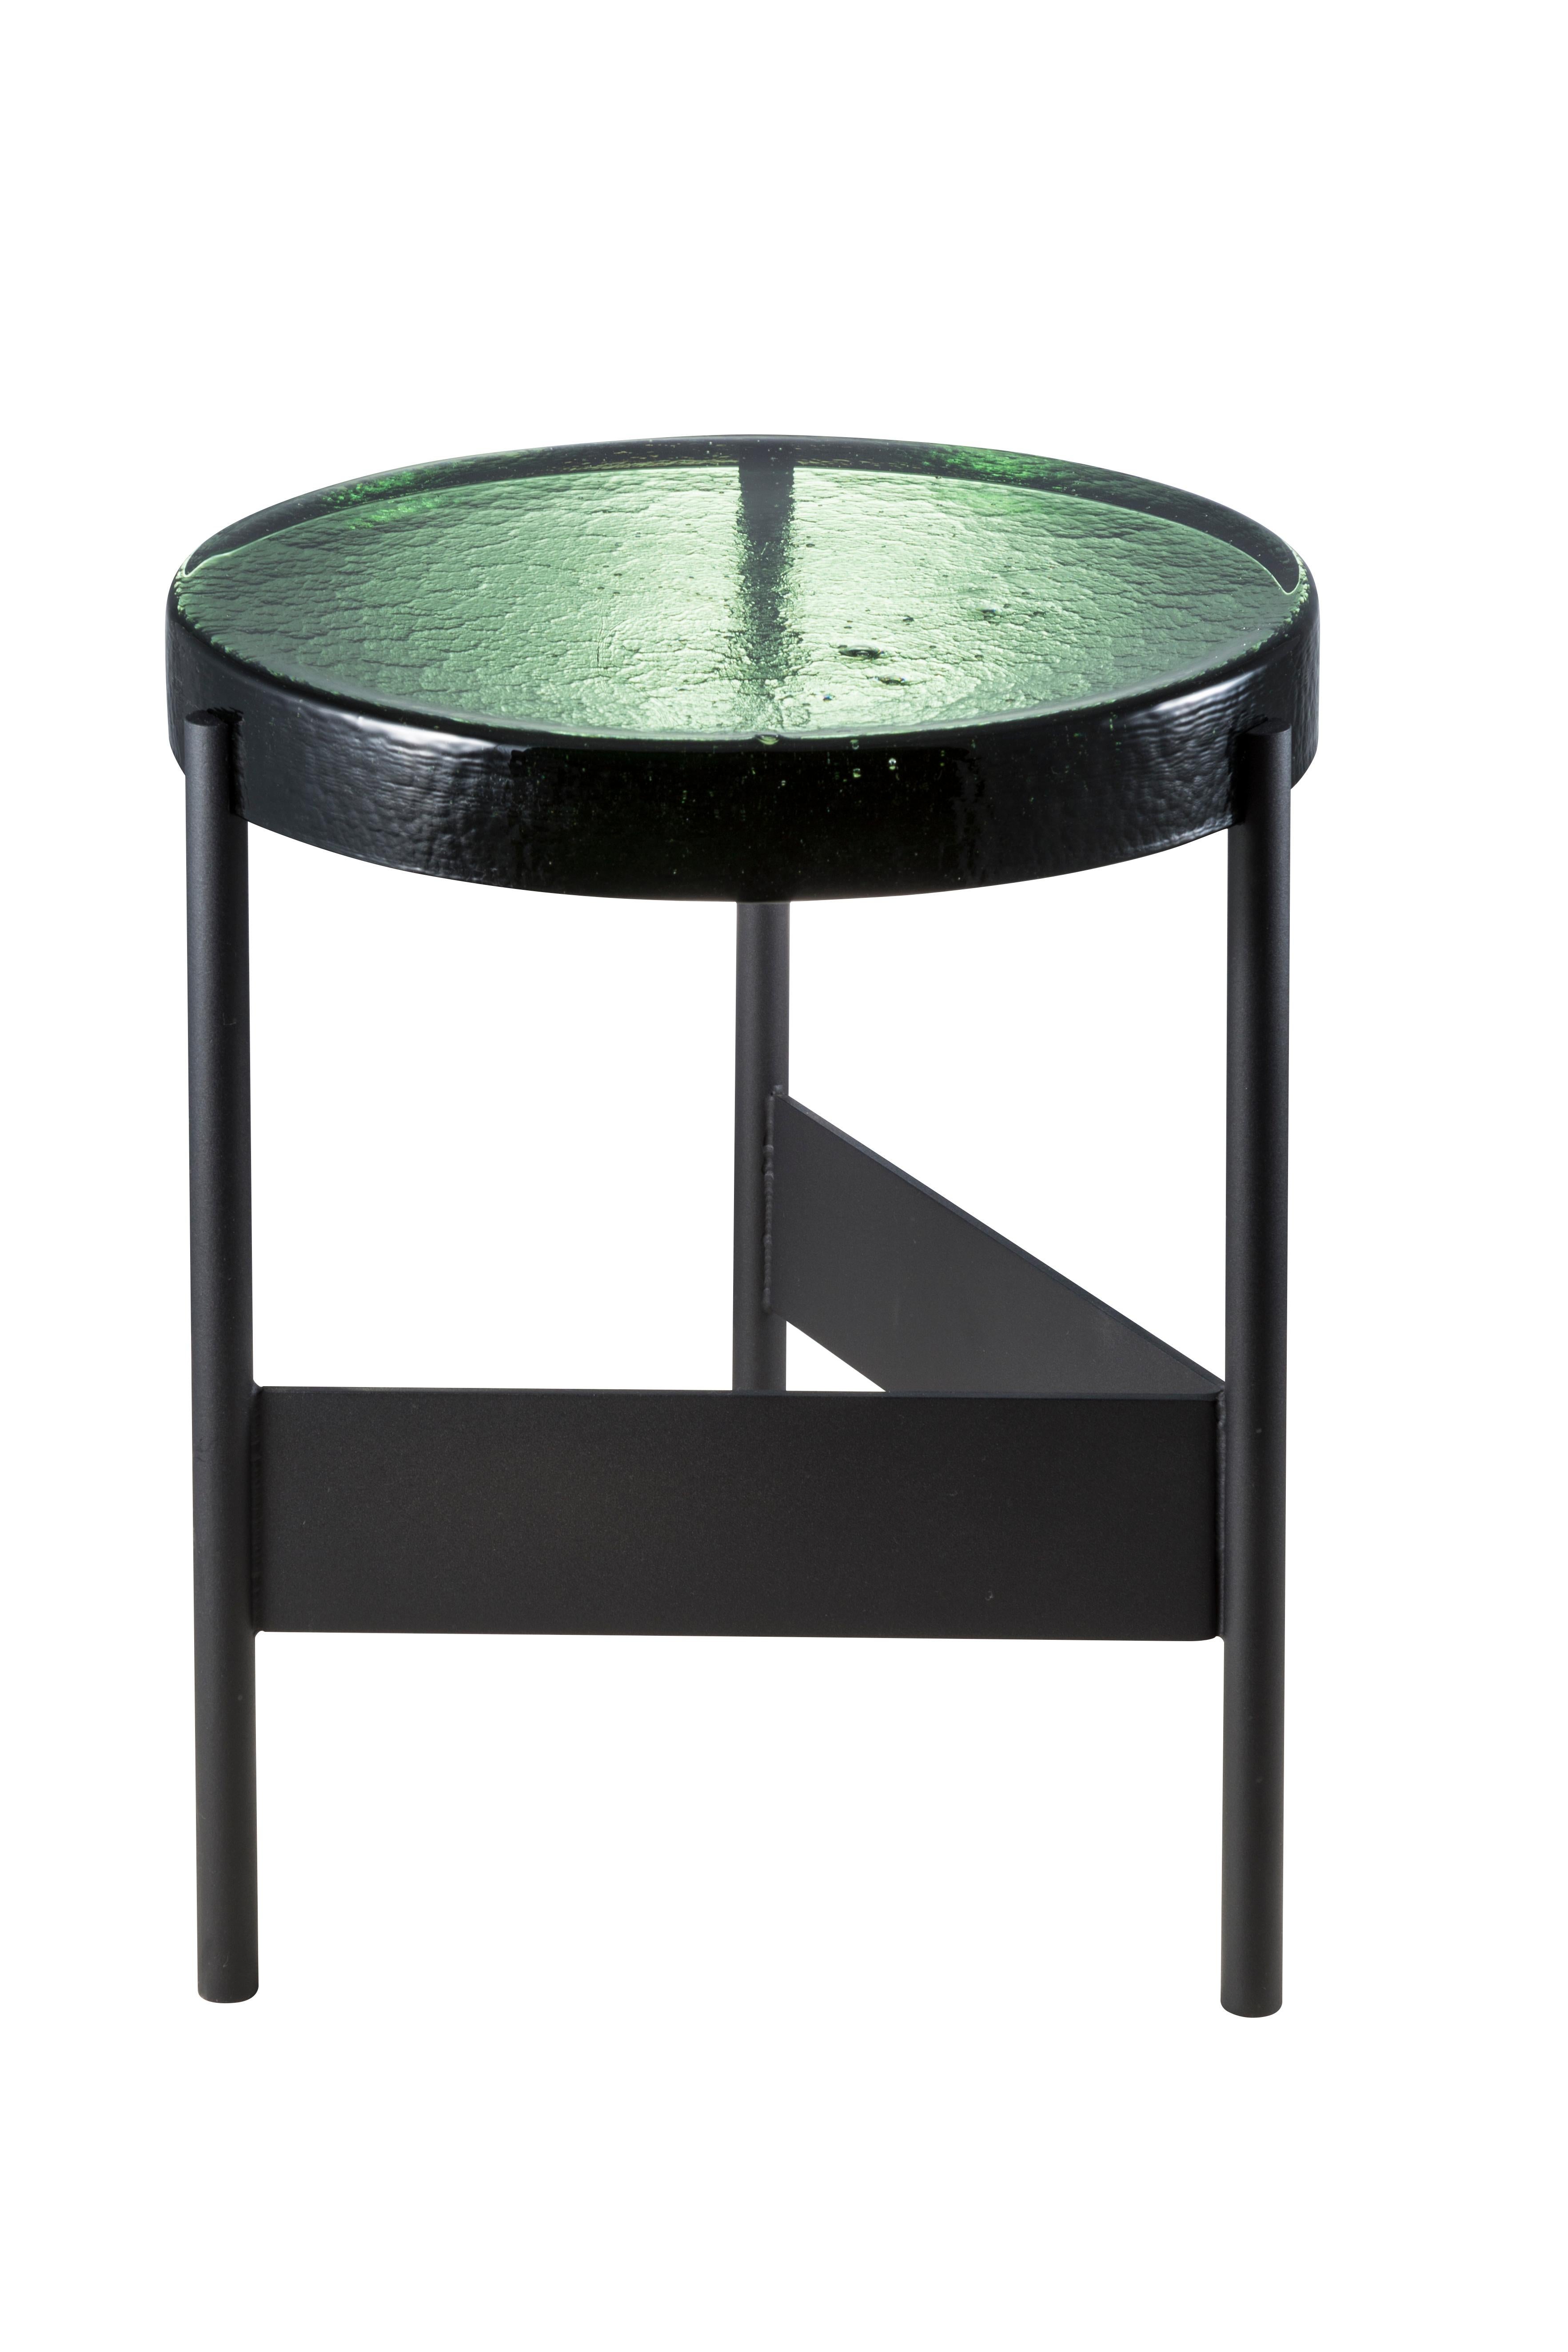 Alwa two green black side table by Pulpo.
Dimensions: D38 x H44 cm.
Materials: casted glass; powder coated steel.

Also available in different finishes. 

Normally, glass is regarded as being lightweight with sharp edges. In contrast, Sebastian